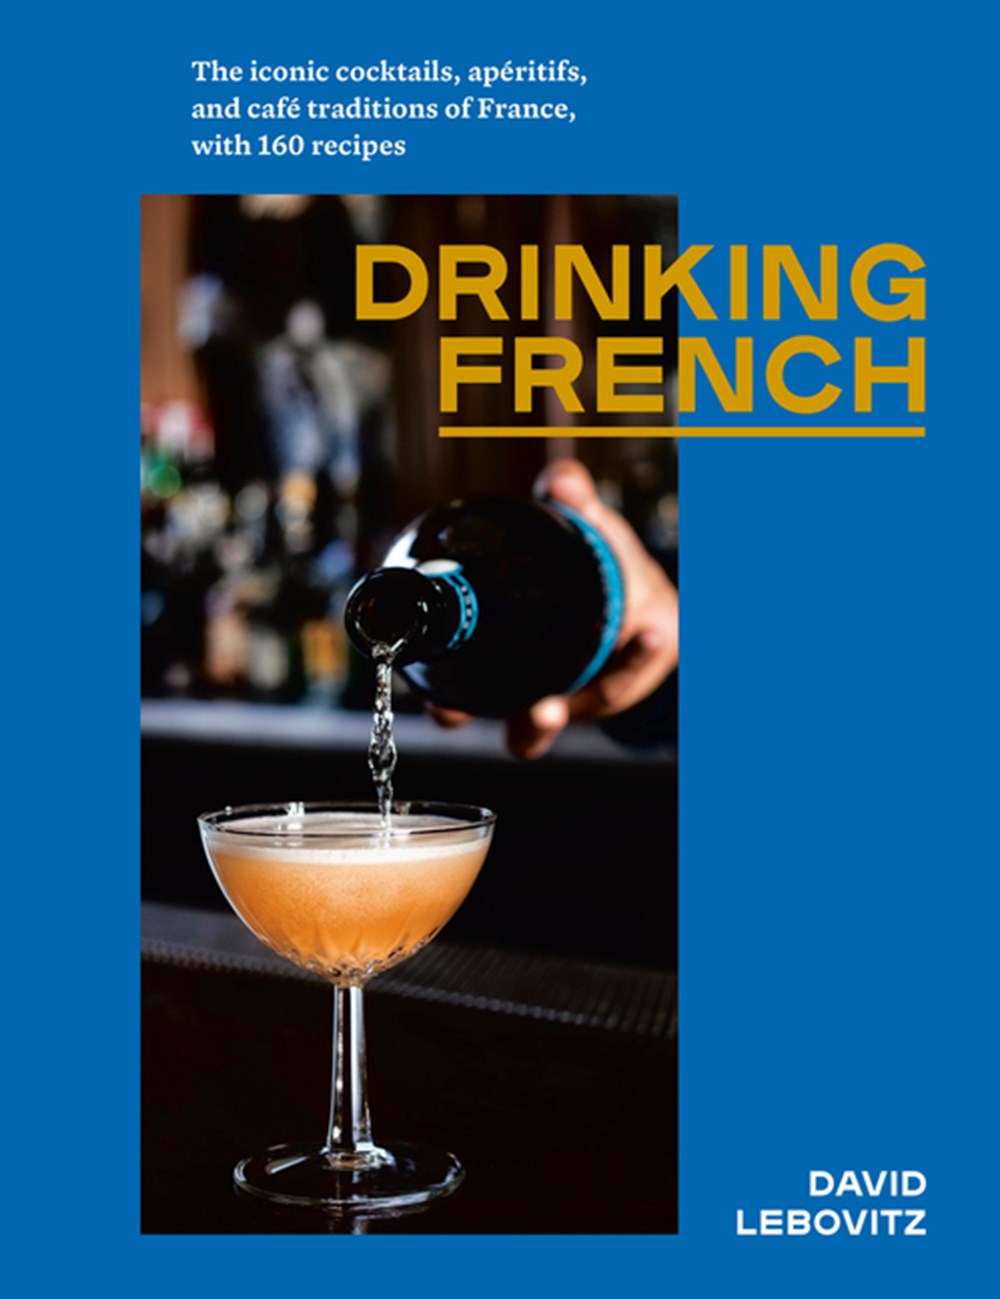 Drinking French The Iconic Cocktails, Ap?ritifs, and Caf? Traditions of France, with 160 Recipes